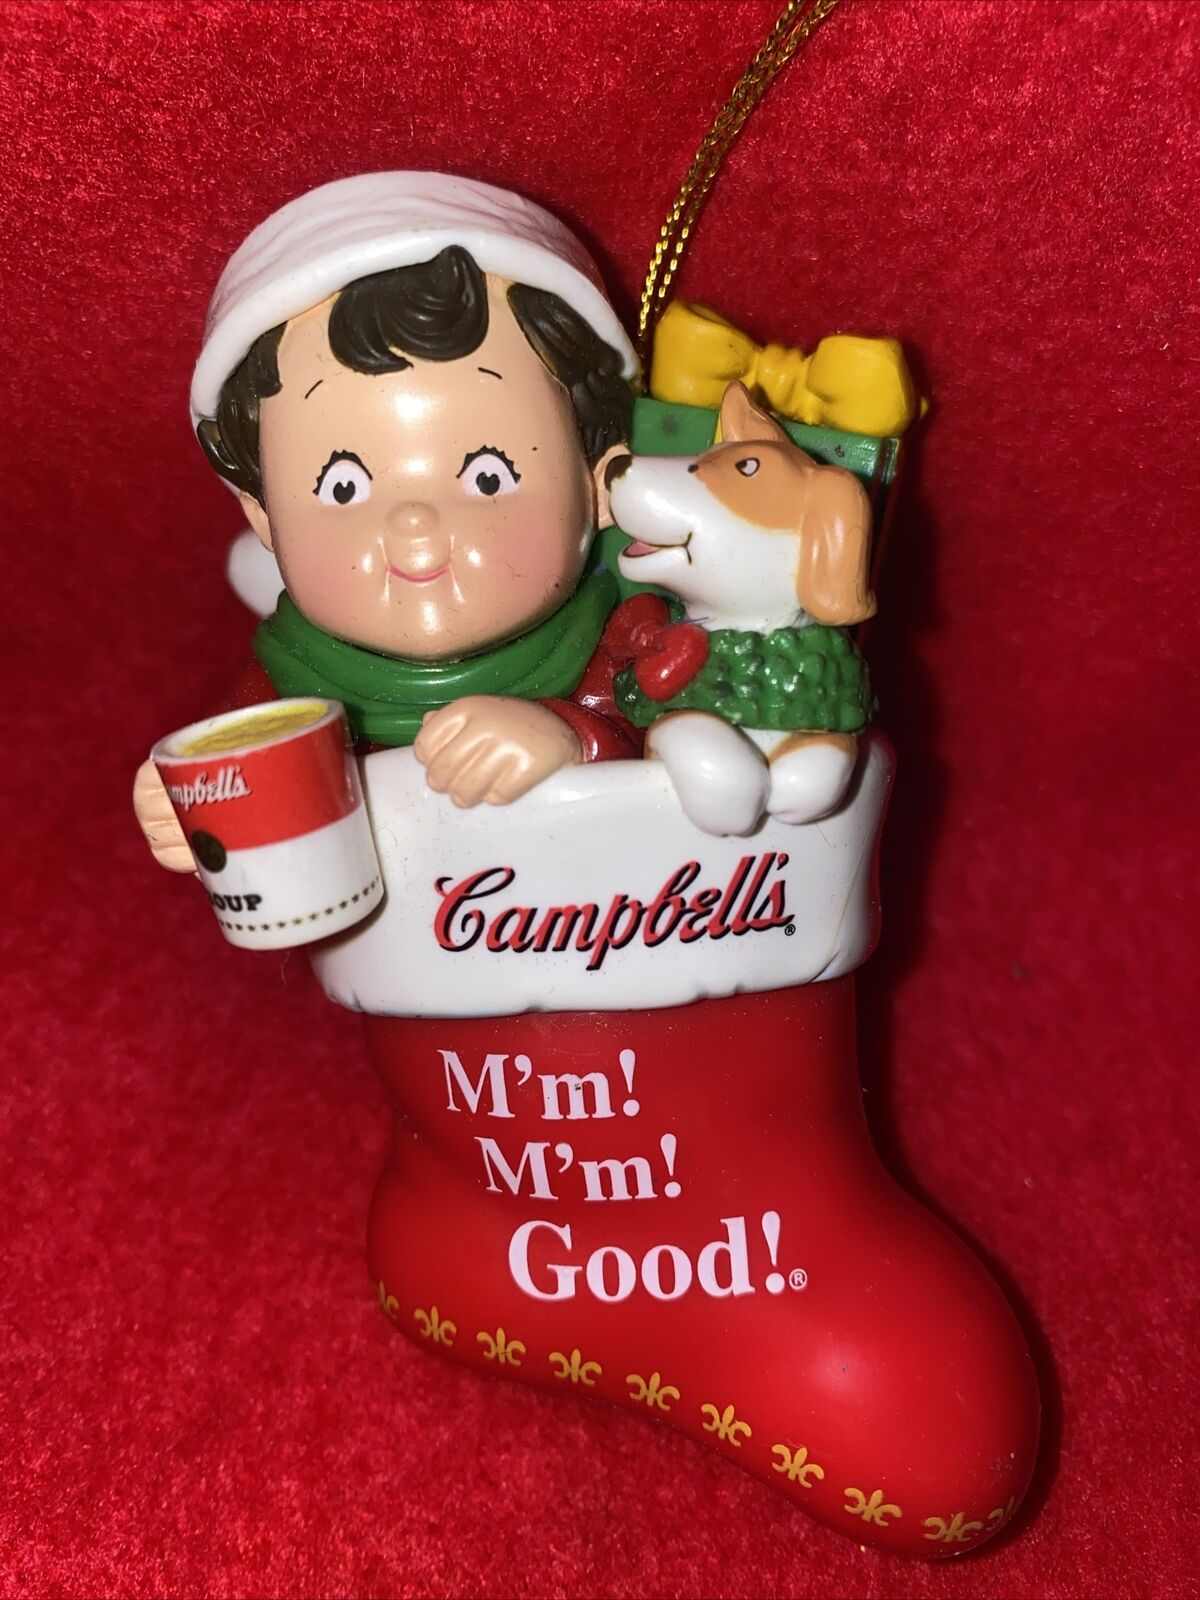 Campbells Soup Vintage Chirstmas Tree Ornament 